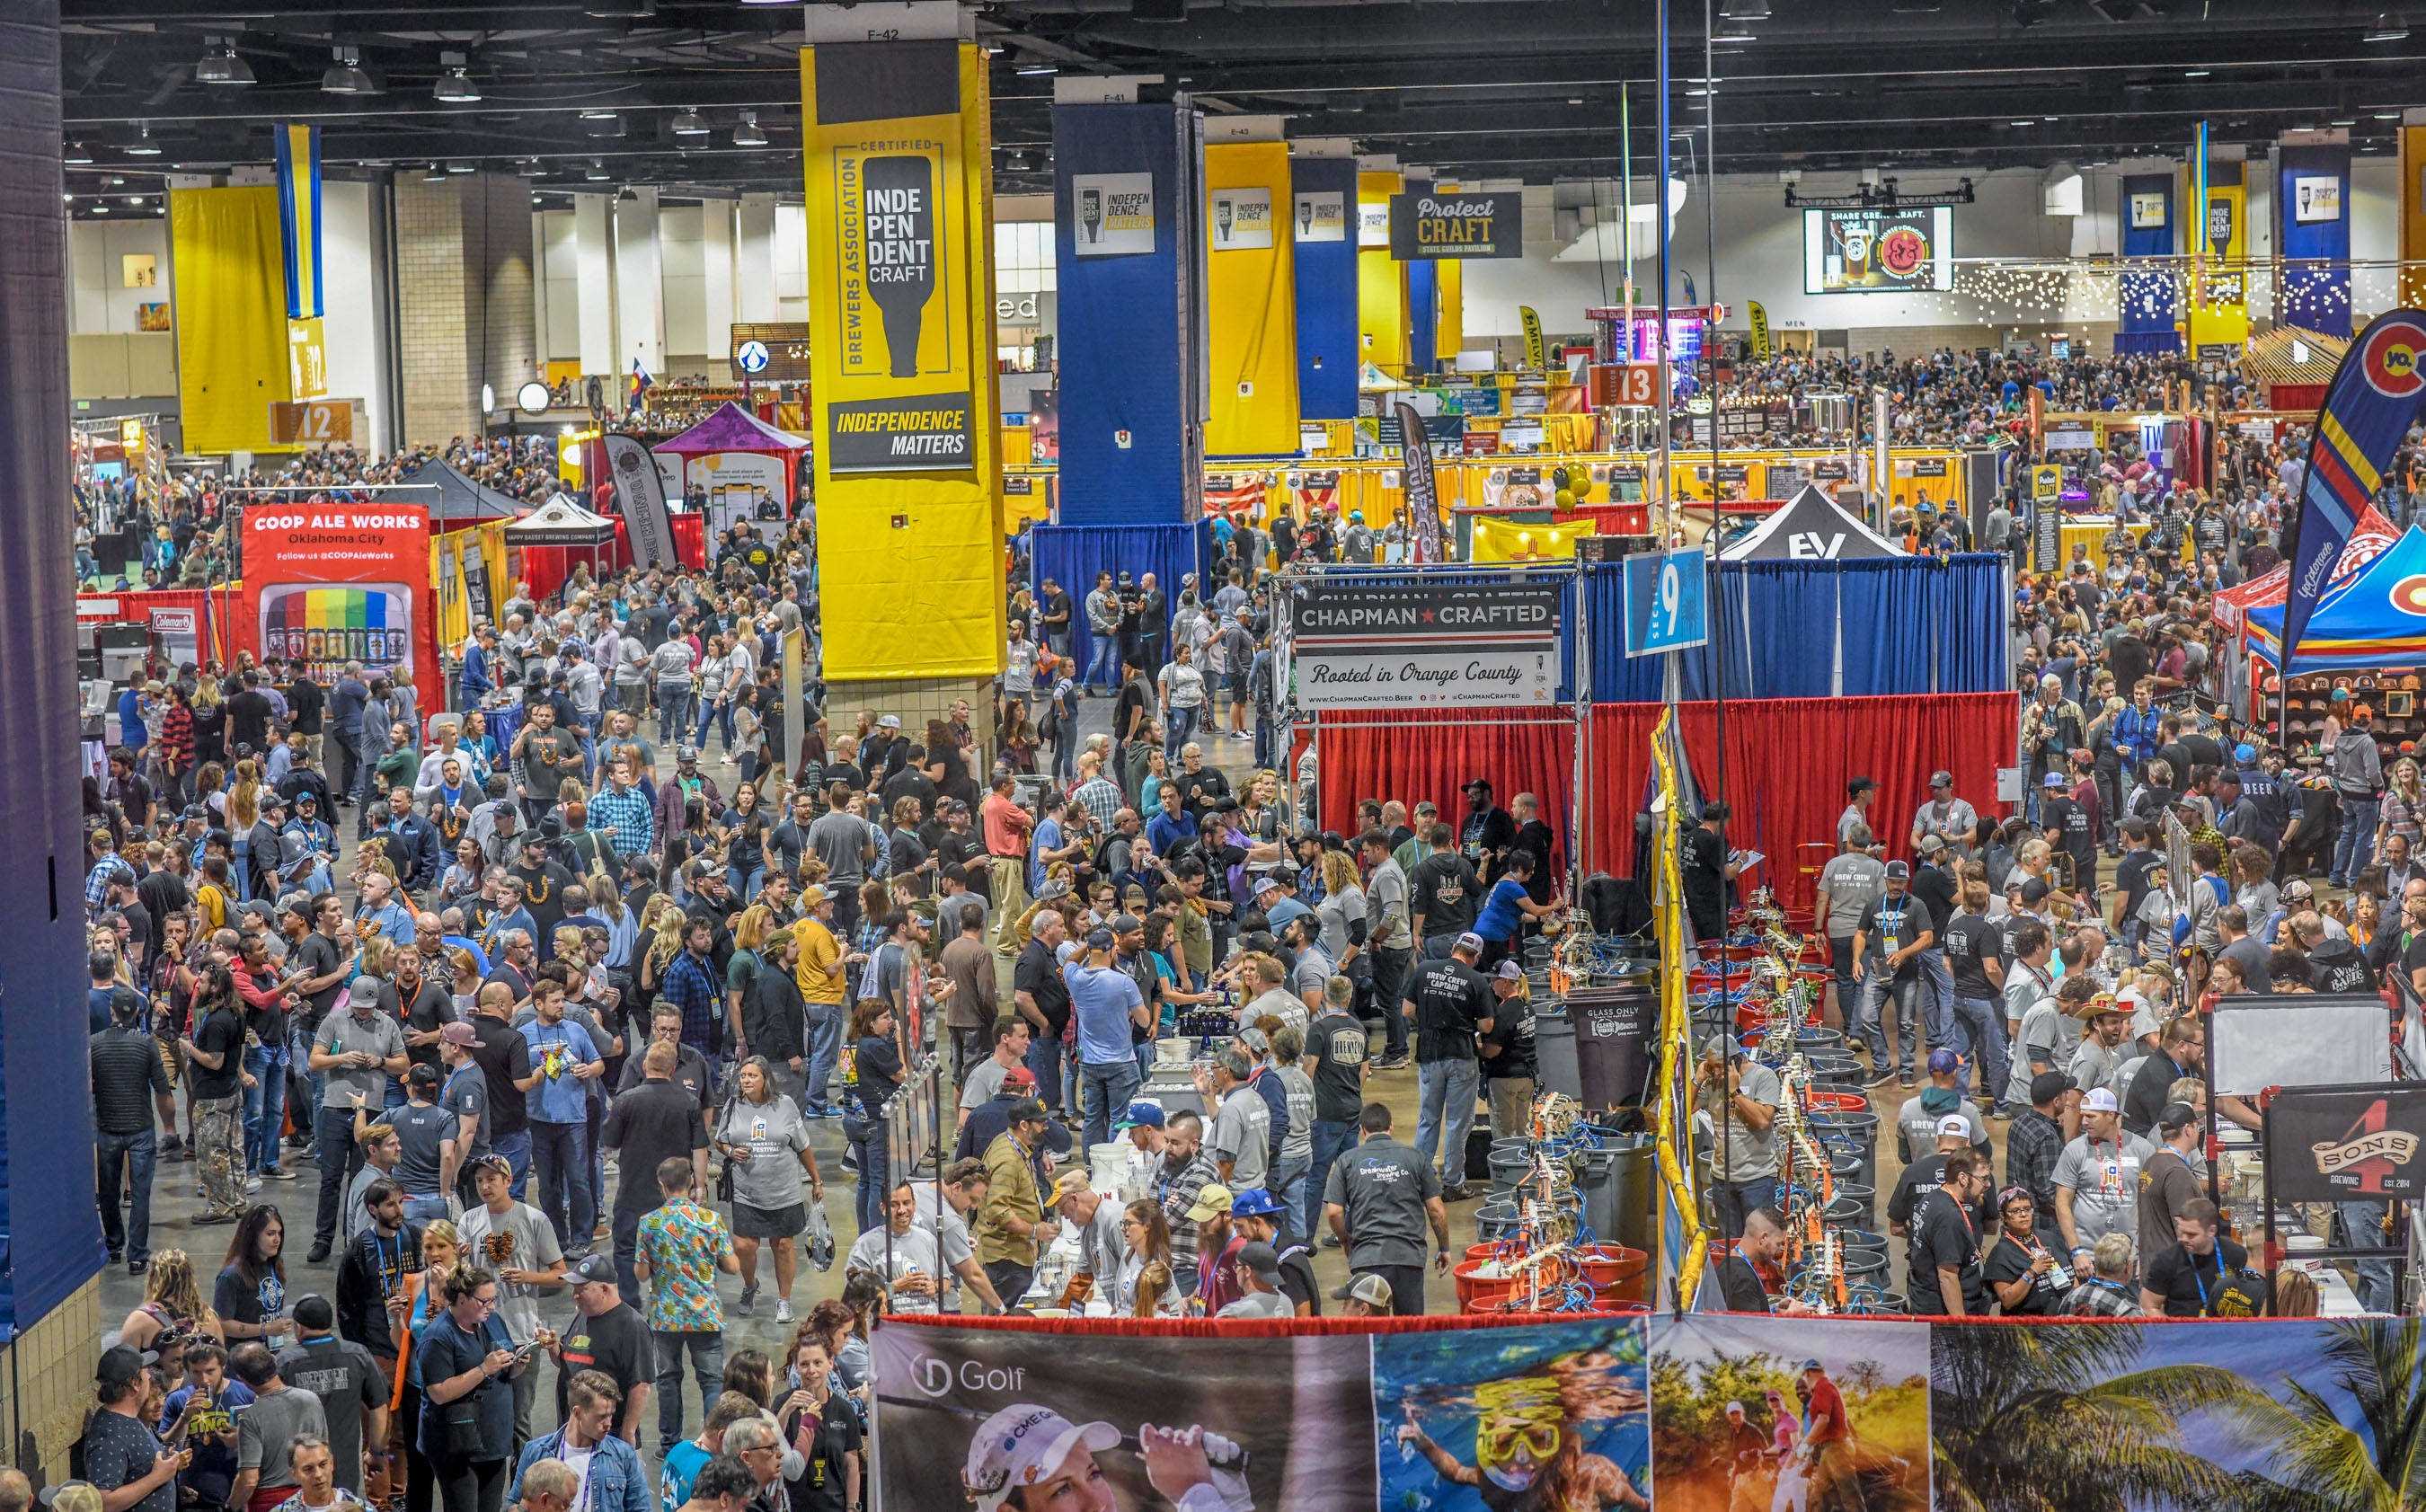 Attendees at the 2019 Great American Beer Festival - Photo ©Brewers Association